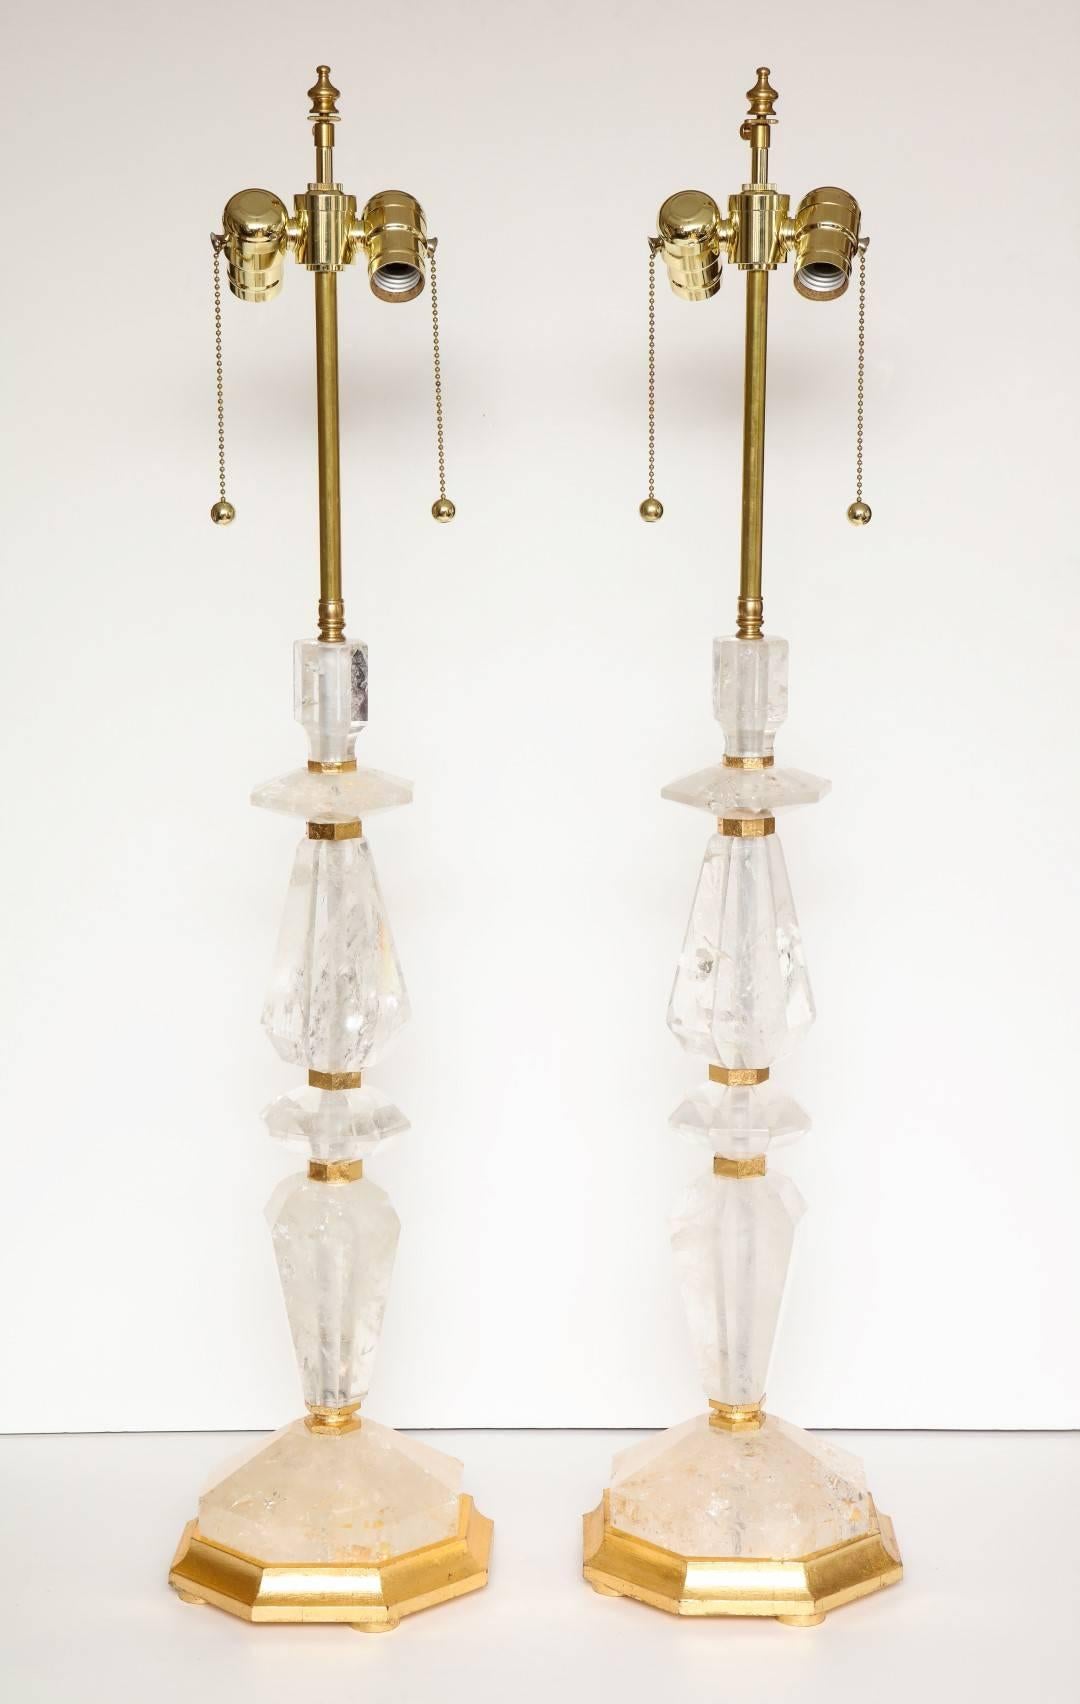 A pair of new rock crystal table lamps, giltwood elements, wired for electricity.